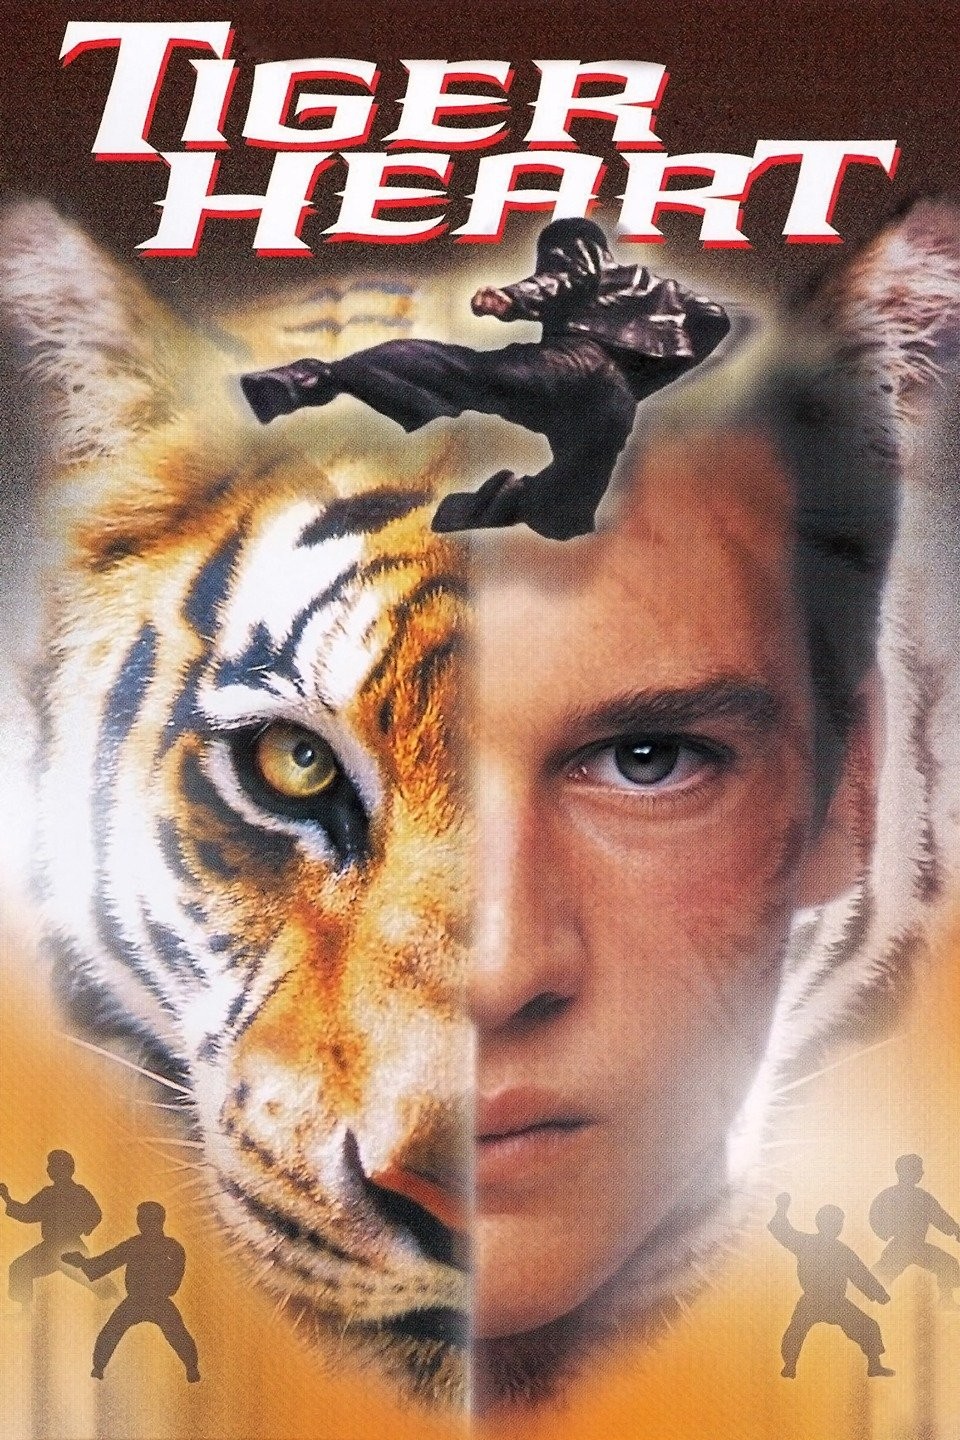 Bengal Tiger, Cast & Crew, News, Galleries, Movie Posters